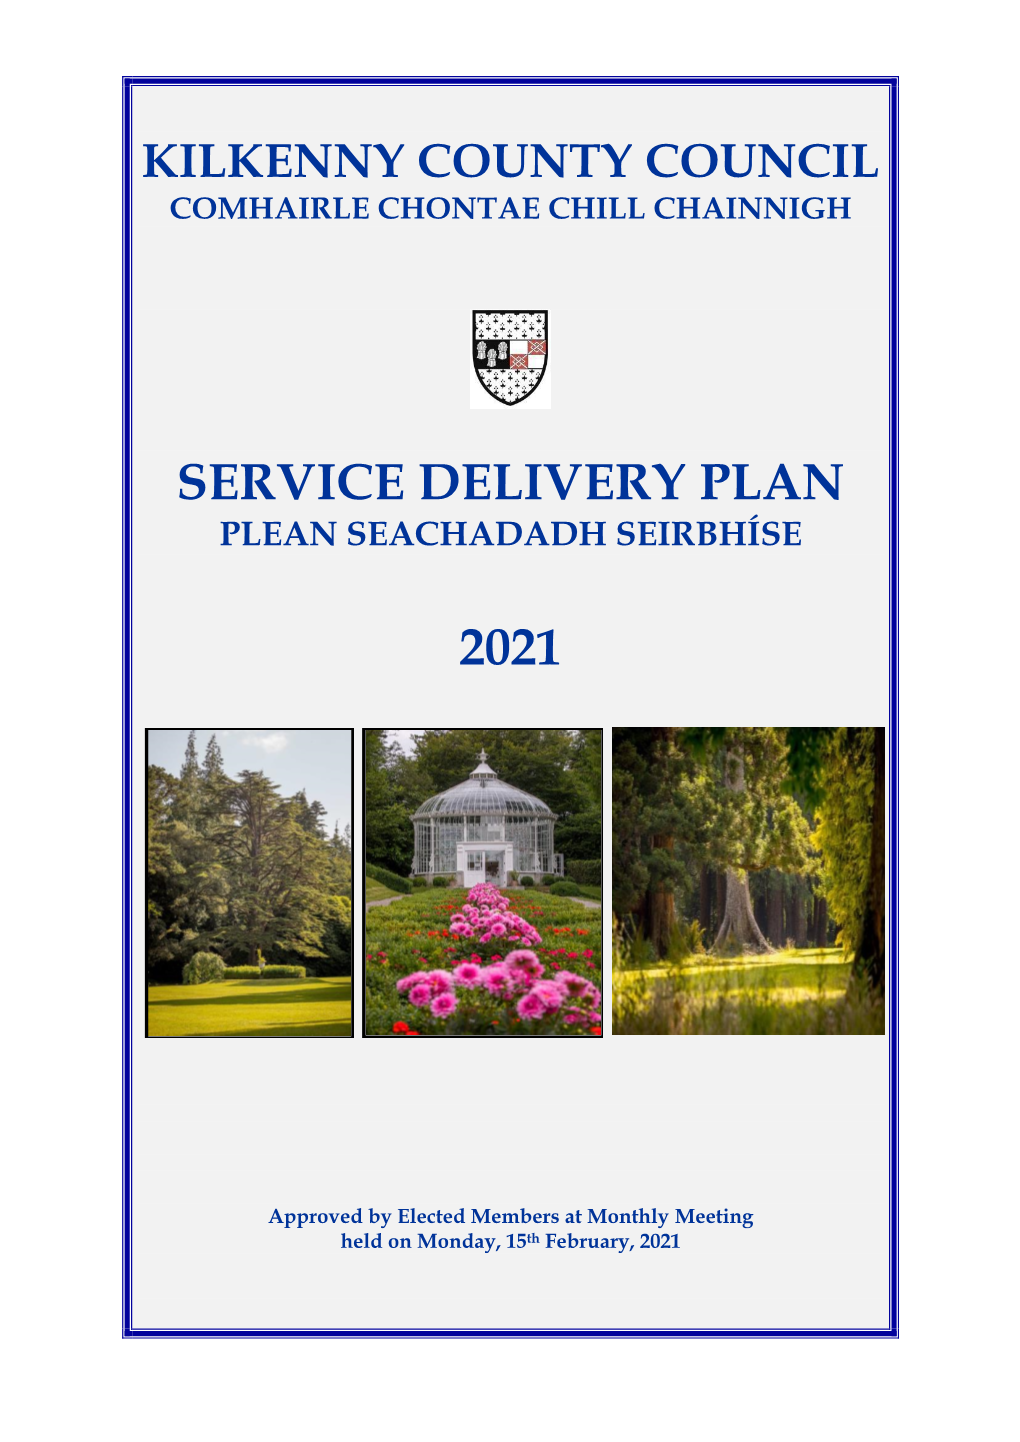 2021 Service Delivery Plan